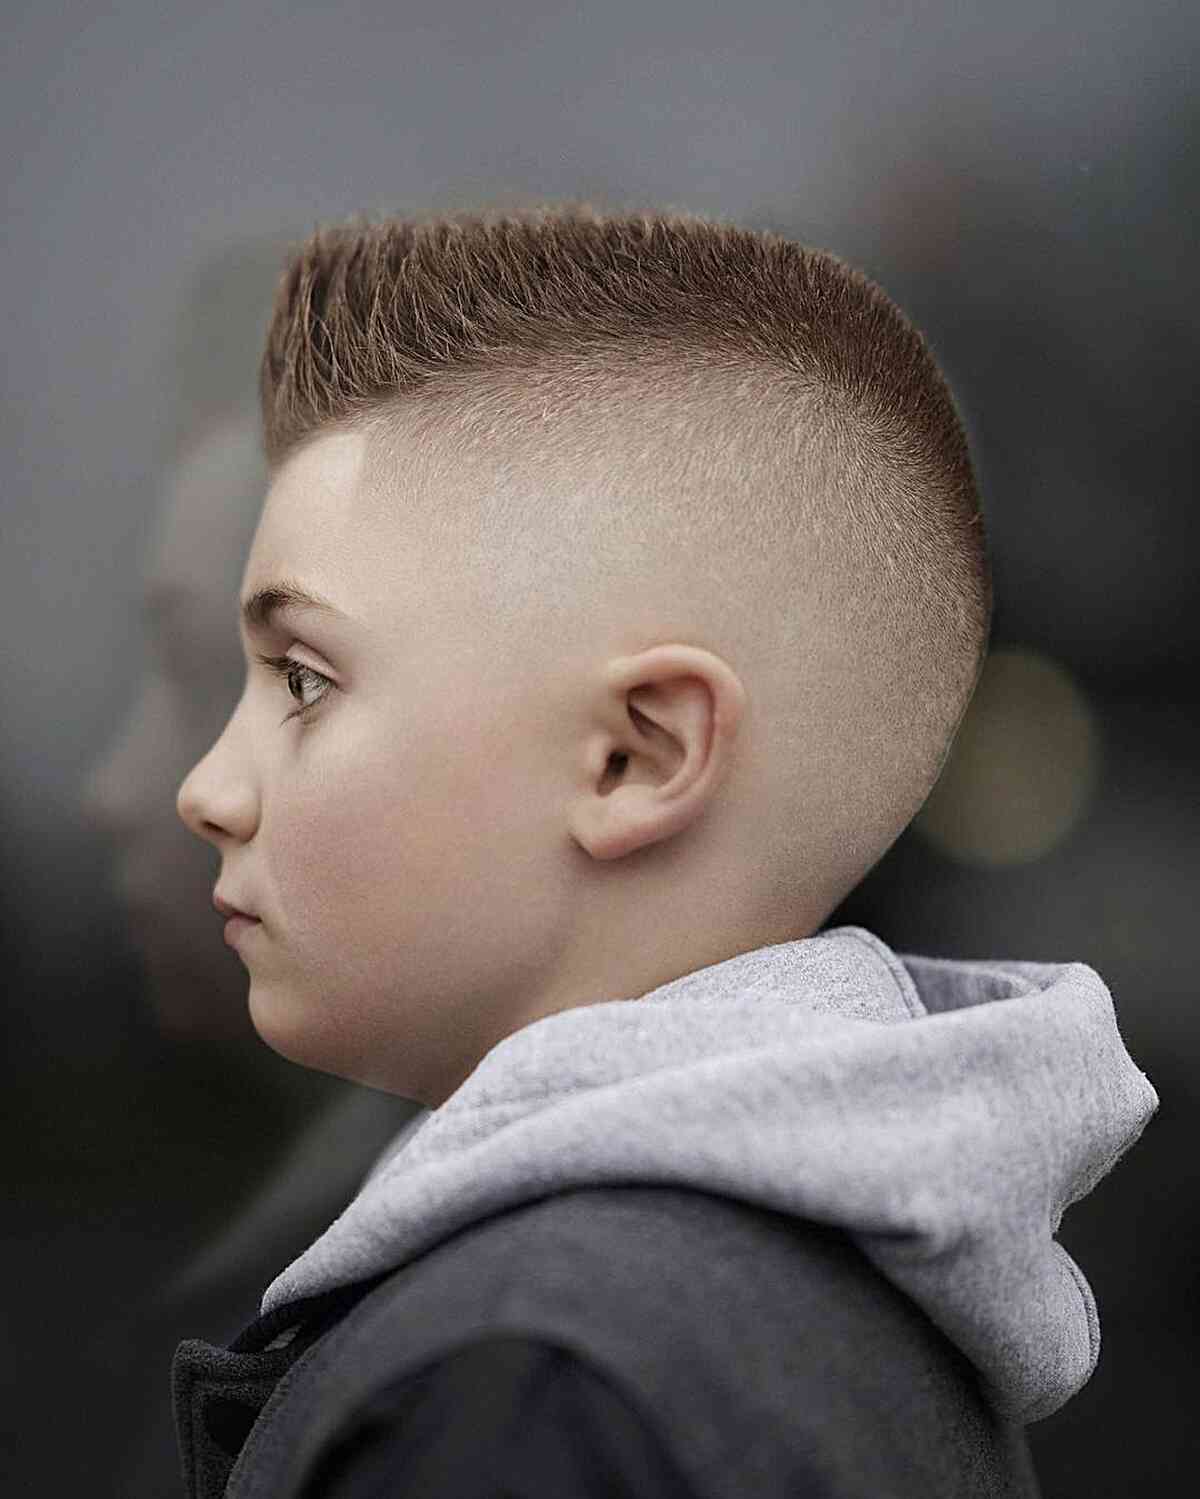 Boy Hair Cuts NEW 2019: Boys Men Hairstyles APK pour Android Télécharger